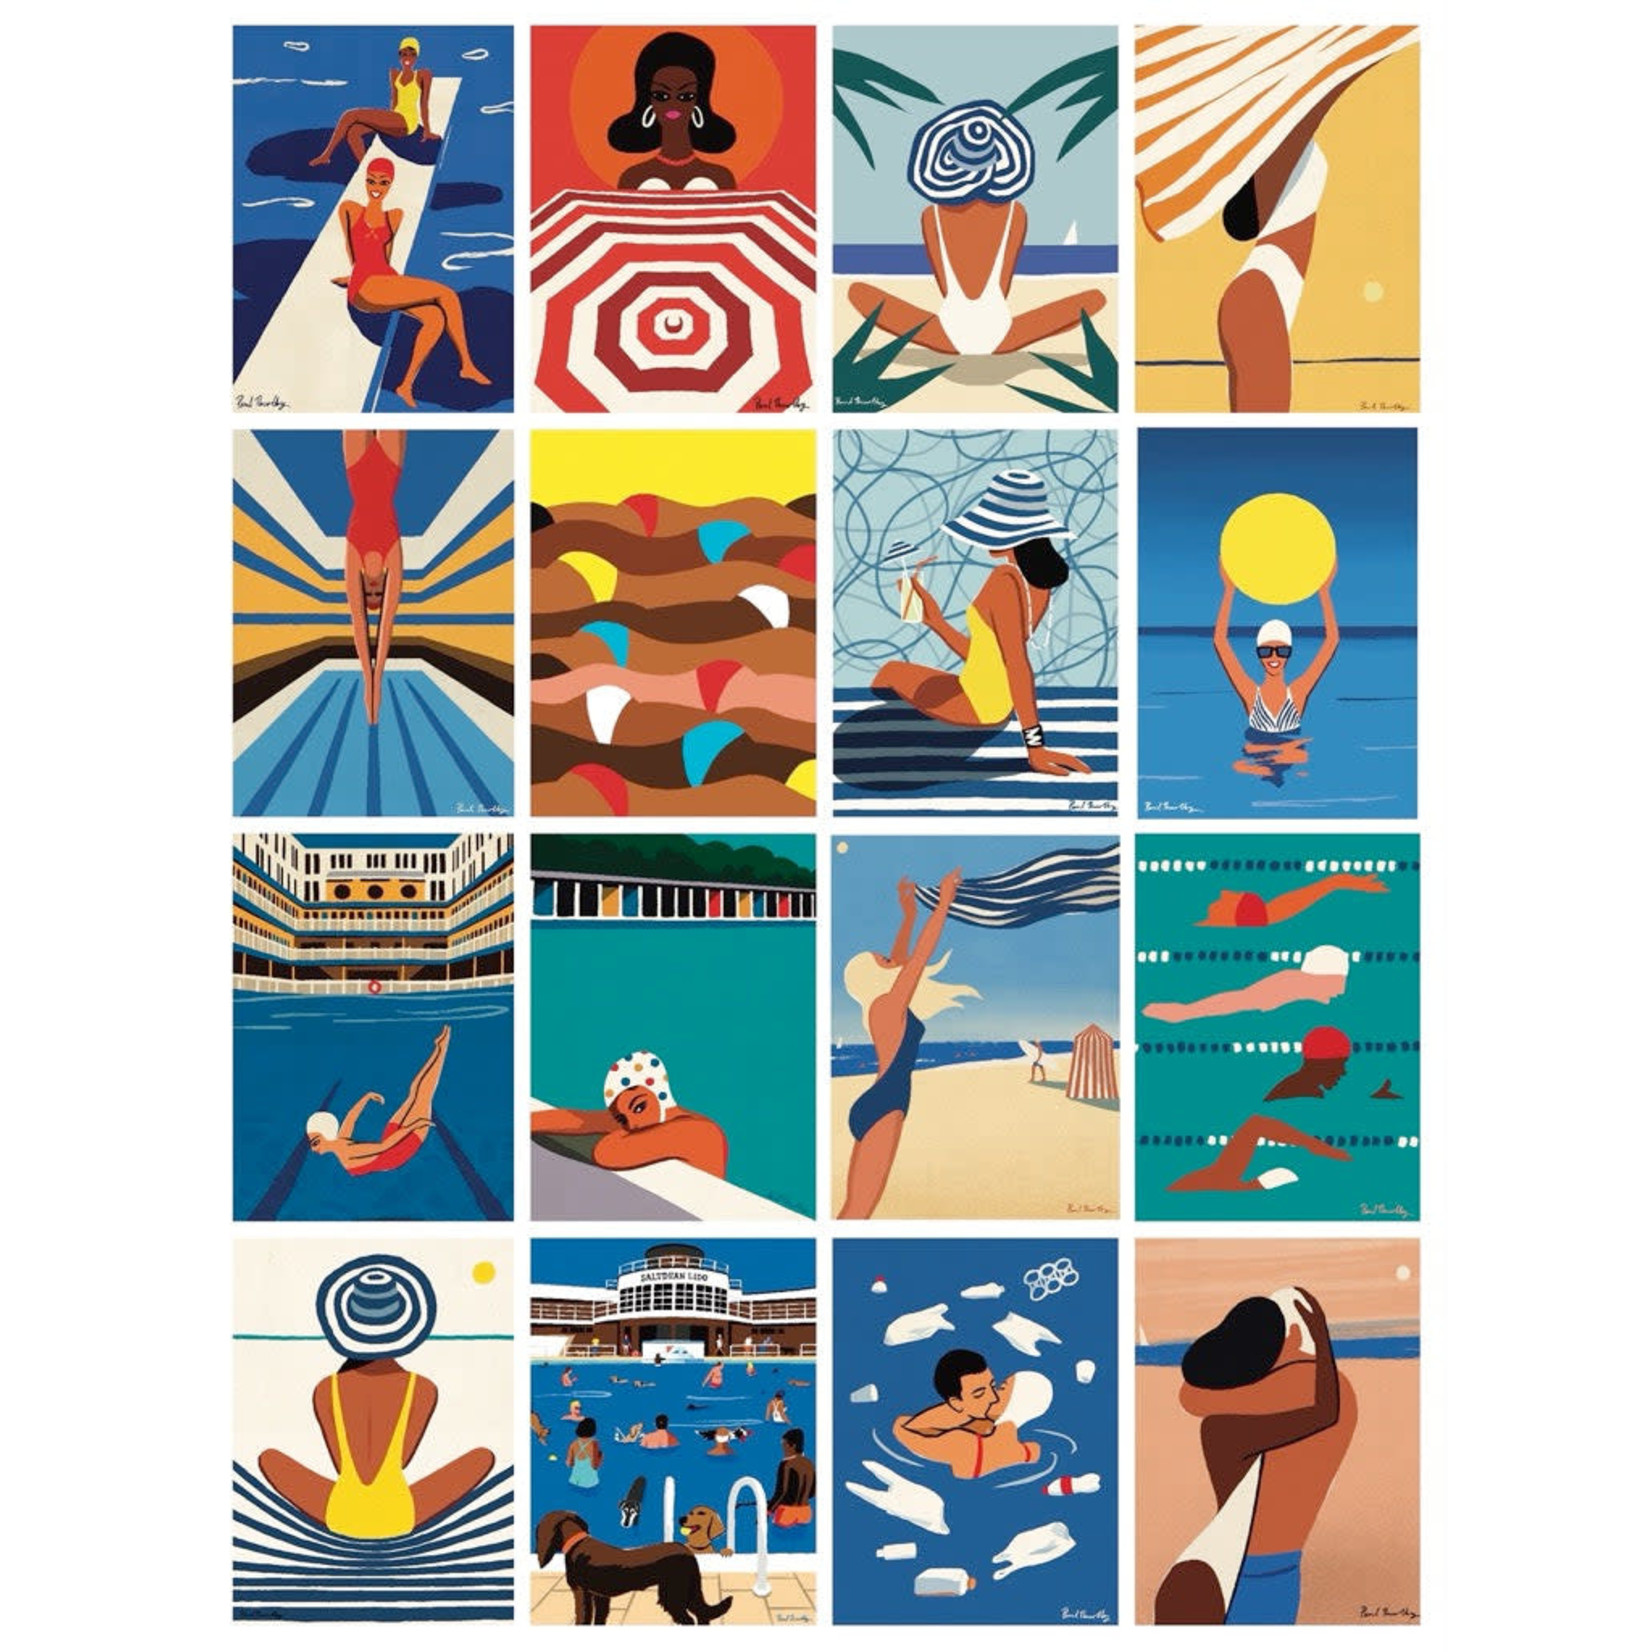 New York Puzzle Co Paul Thurlby - Bathing Beauties 1000 Piece Puzzle